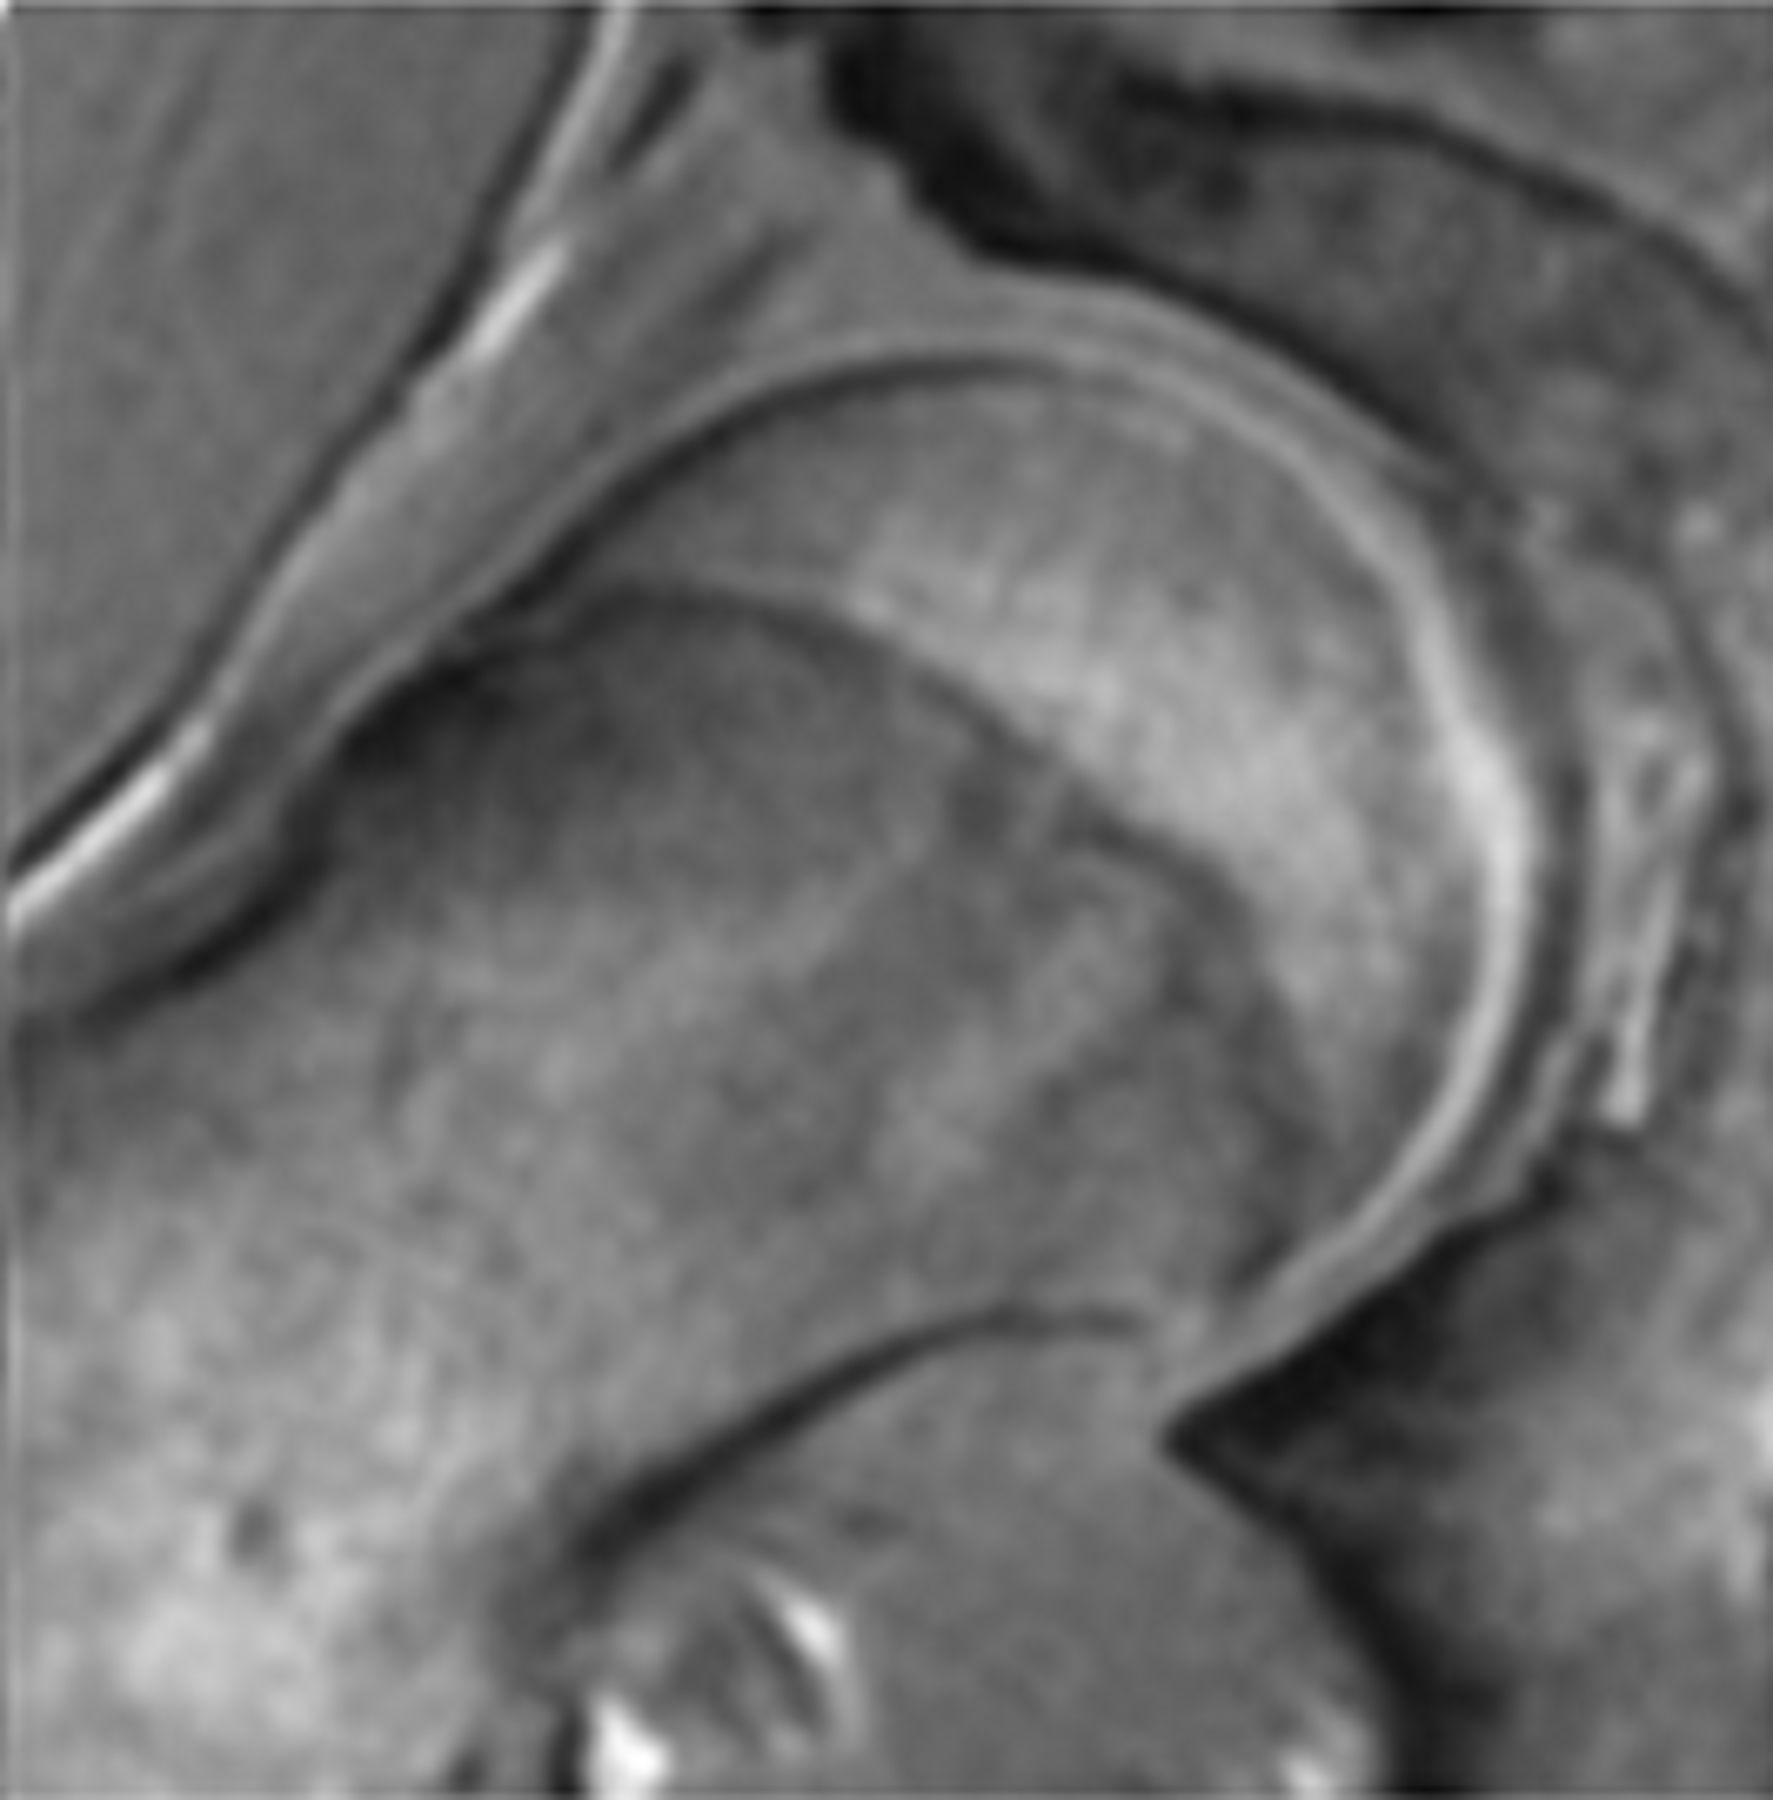 Figs. 2a - 2f 
          Representative MRI images
showing the six physeal grades in study subjects; a) grade 1, b)
grade 2, c) grade 3, d) grade 4, e) grade 5, and f) grade 6.
        